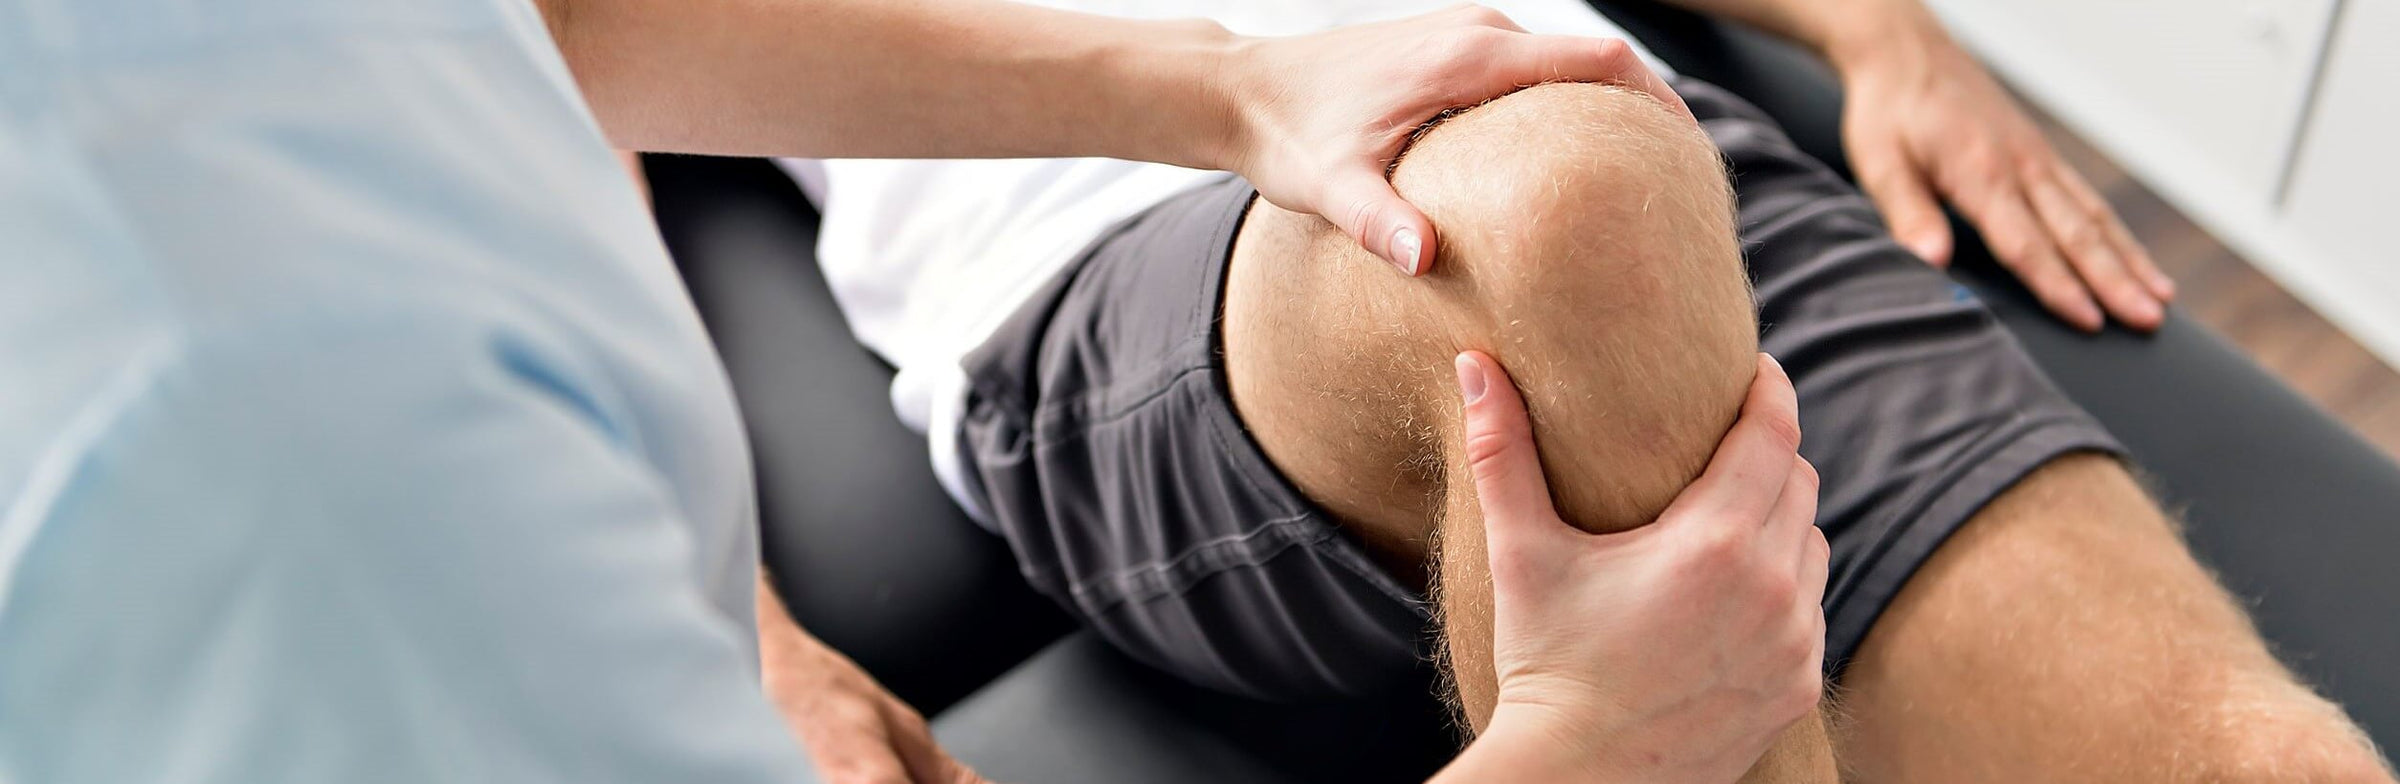 A man with possible PCL tear is getting knee checked by Physiotherapist